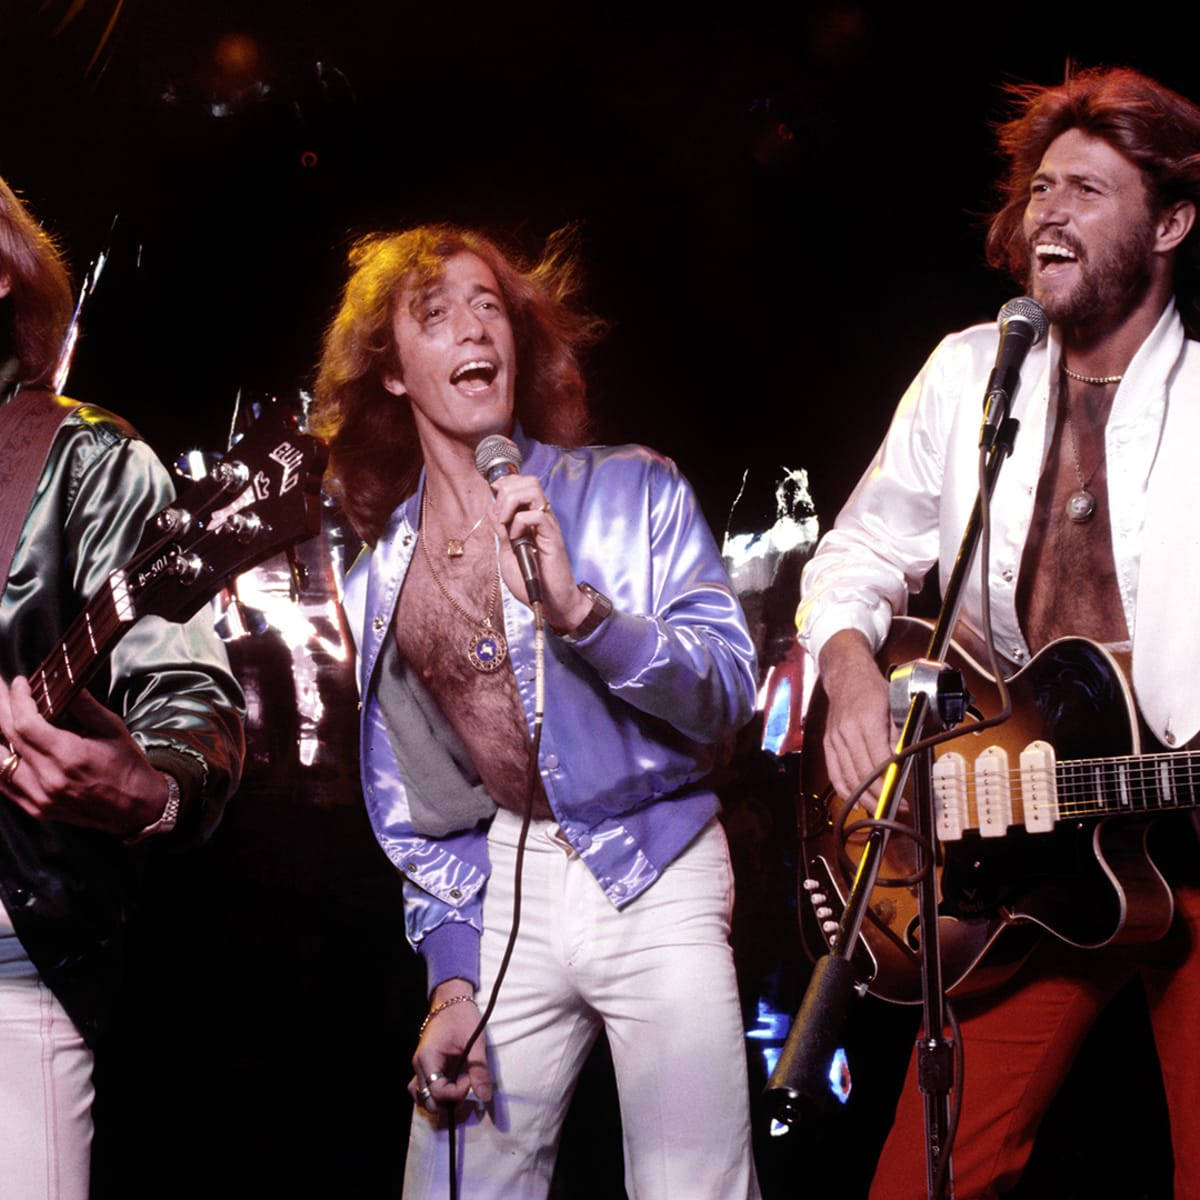 Bee Gees Pop Band Live Performance Background